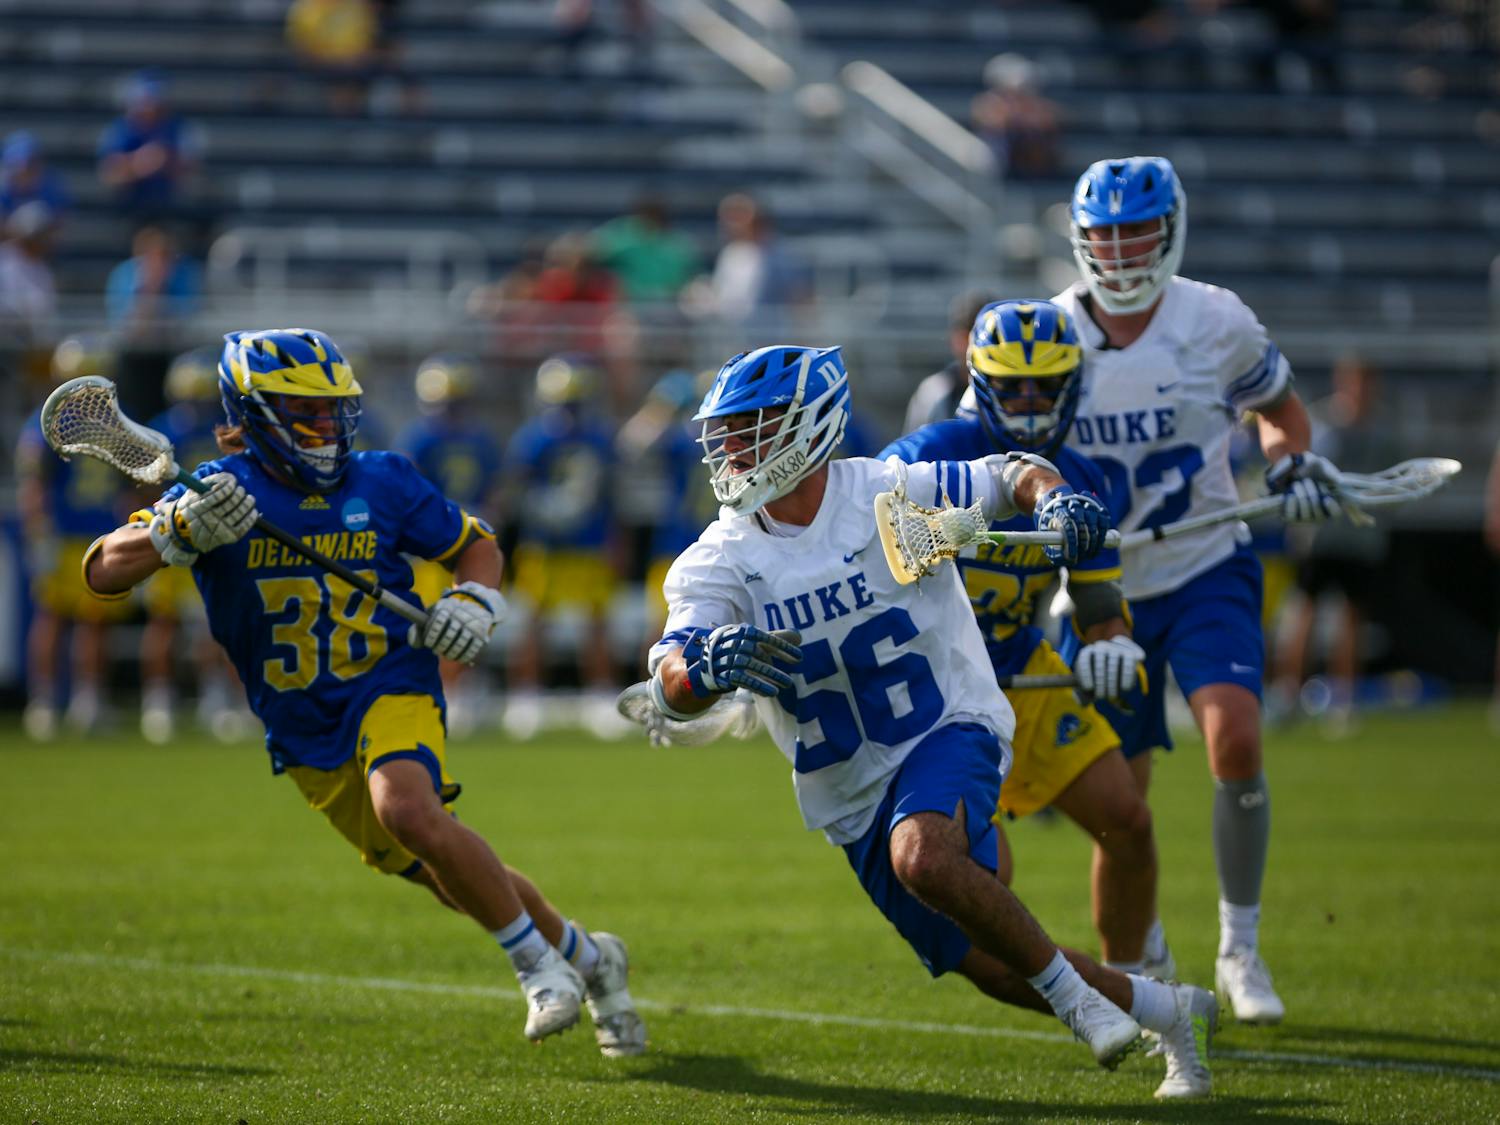 Jake Naso's domination in the circle is a key part of Duke's lethal attack.